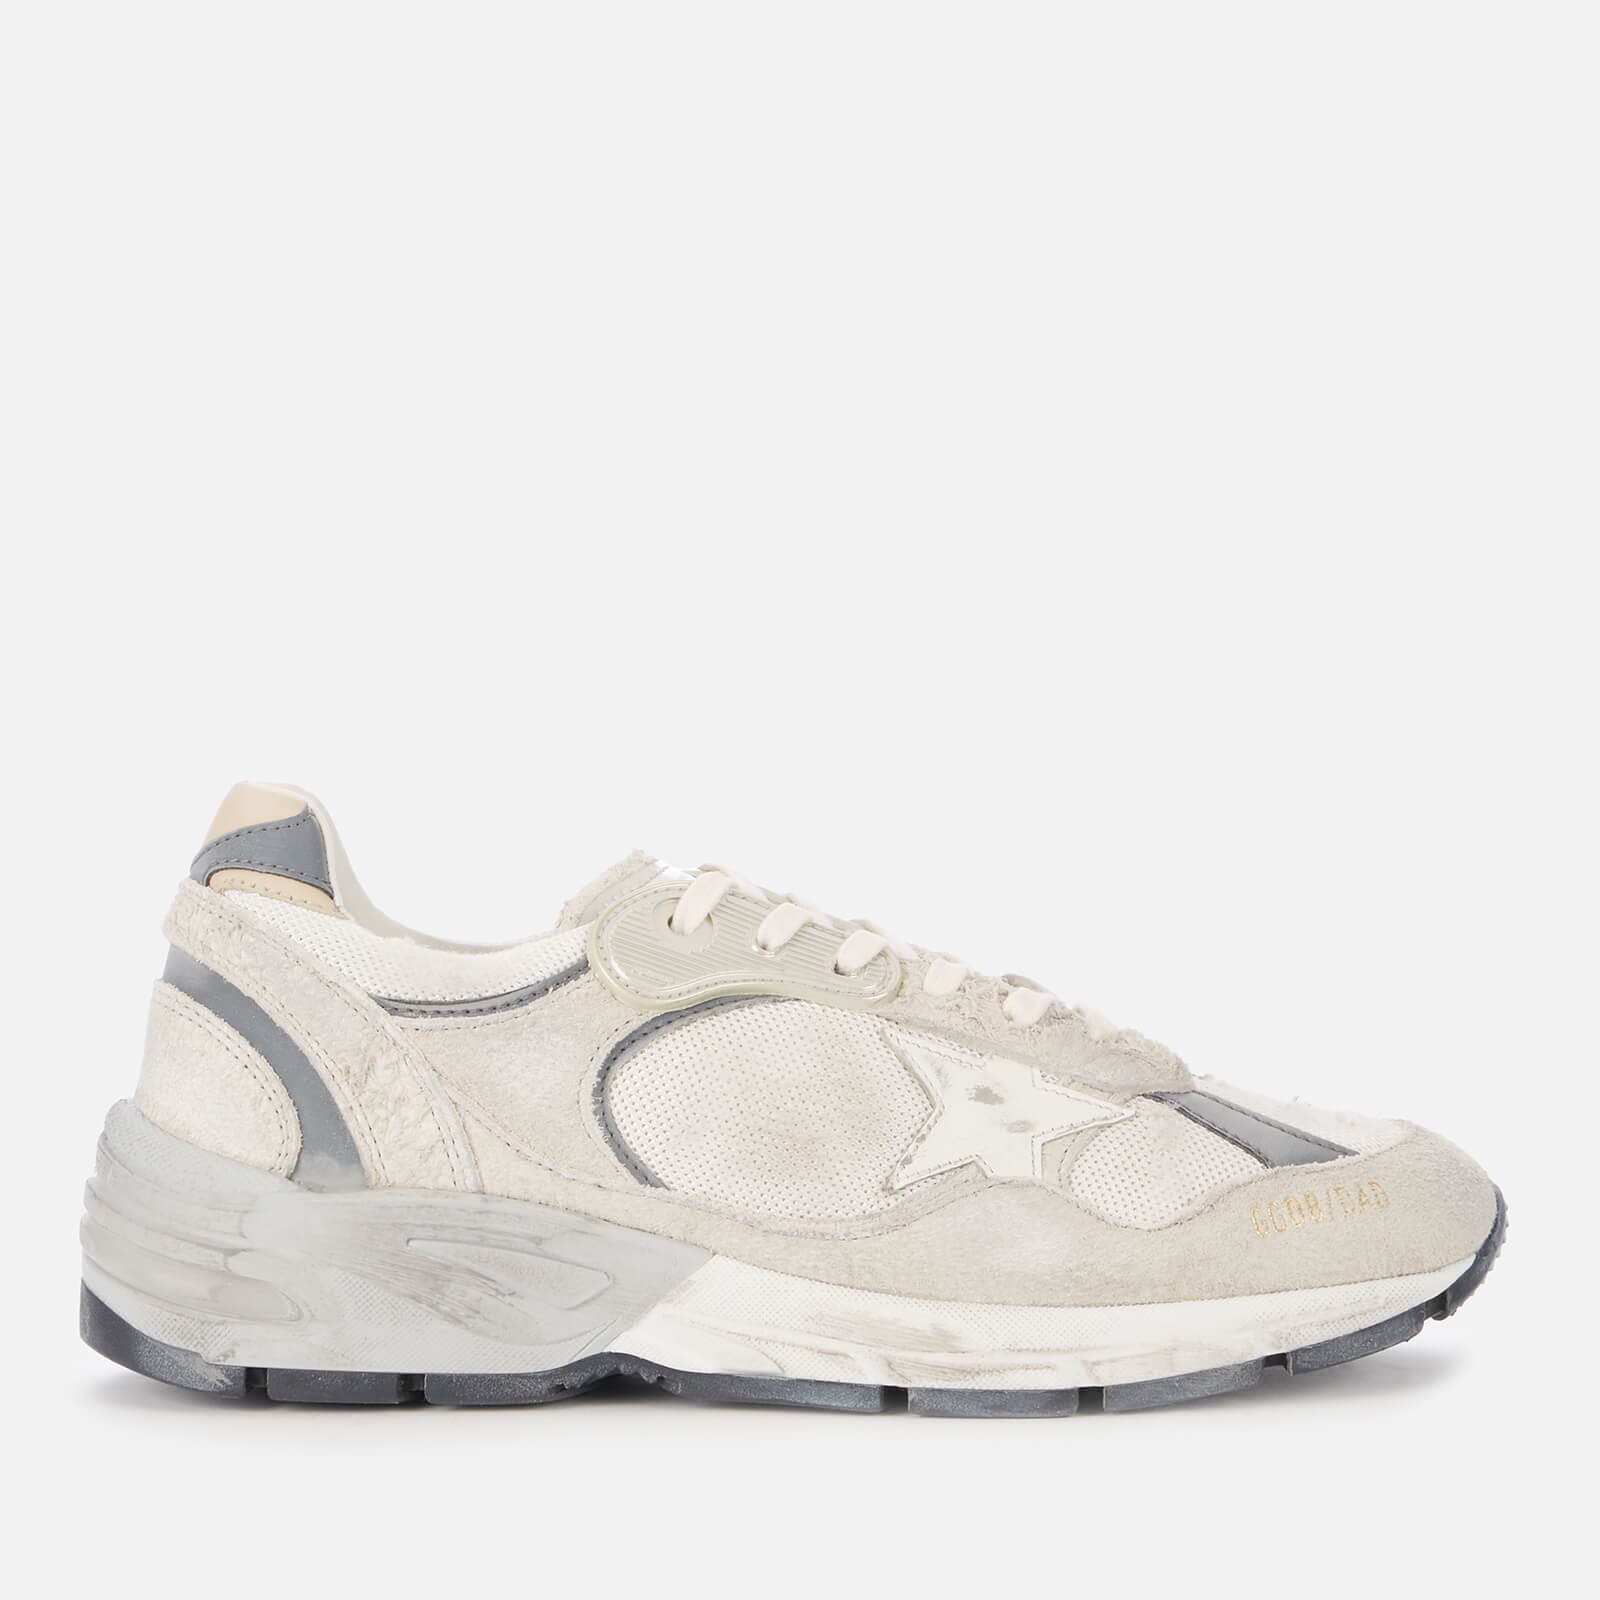 Golden Goose Deluxe Brand Women's Running Dad Trainers - White/Silver - UK 3